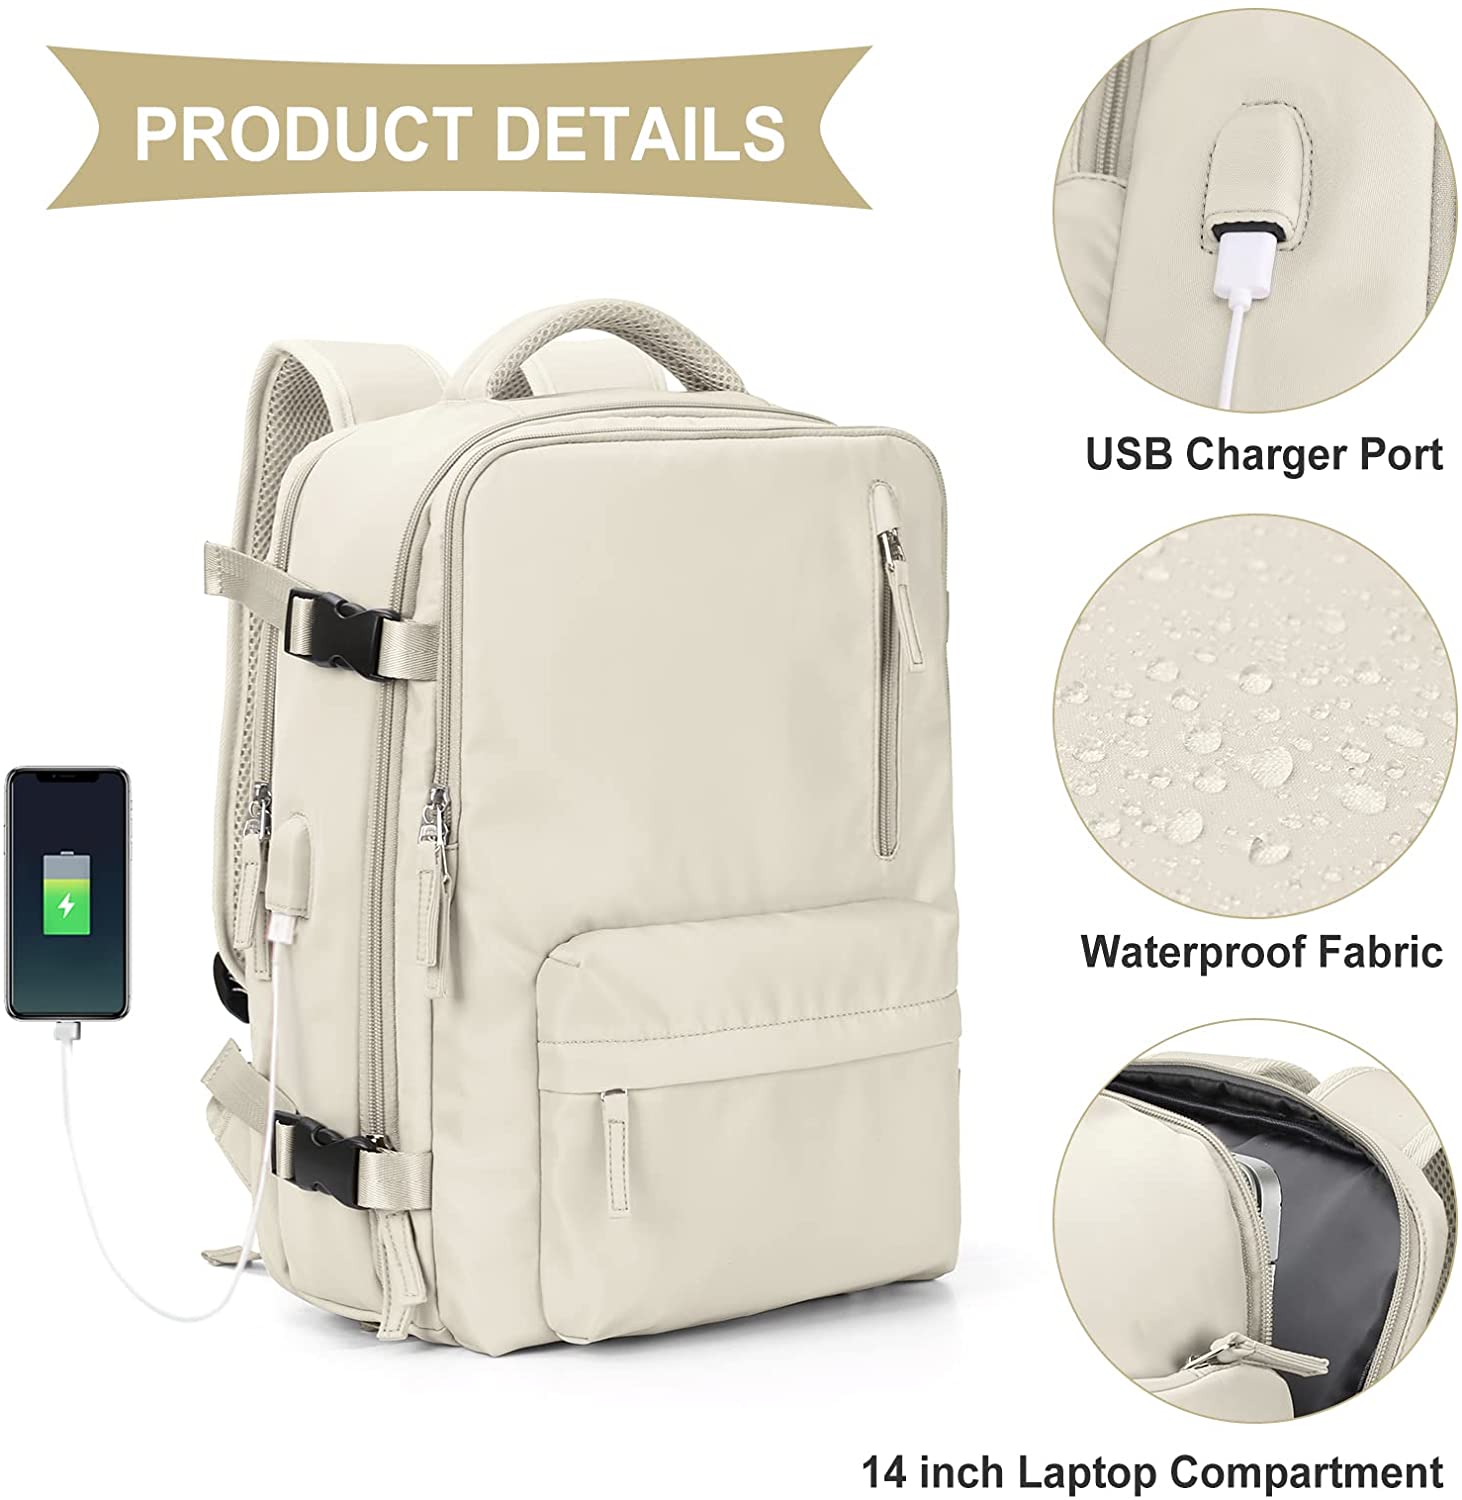 Large Travel Backpack Women, Carry On Backpack,Hiking Backpack Waterproof Outdoor Sports Rucksack Casual Daypack School Bag Fit 14 Inch Laptop with USB Charging Port Shoes Compartment - image 5 of 7